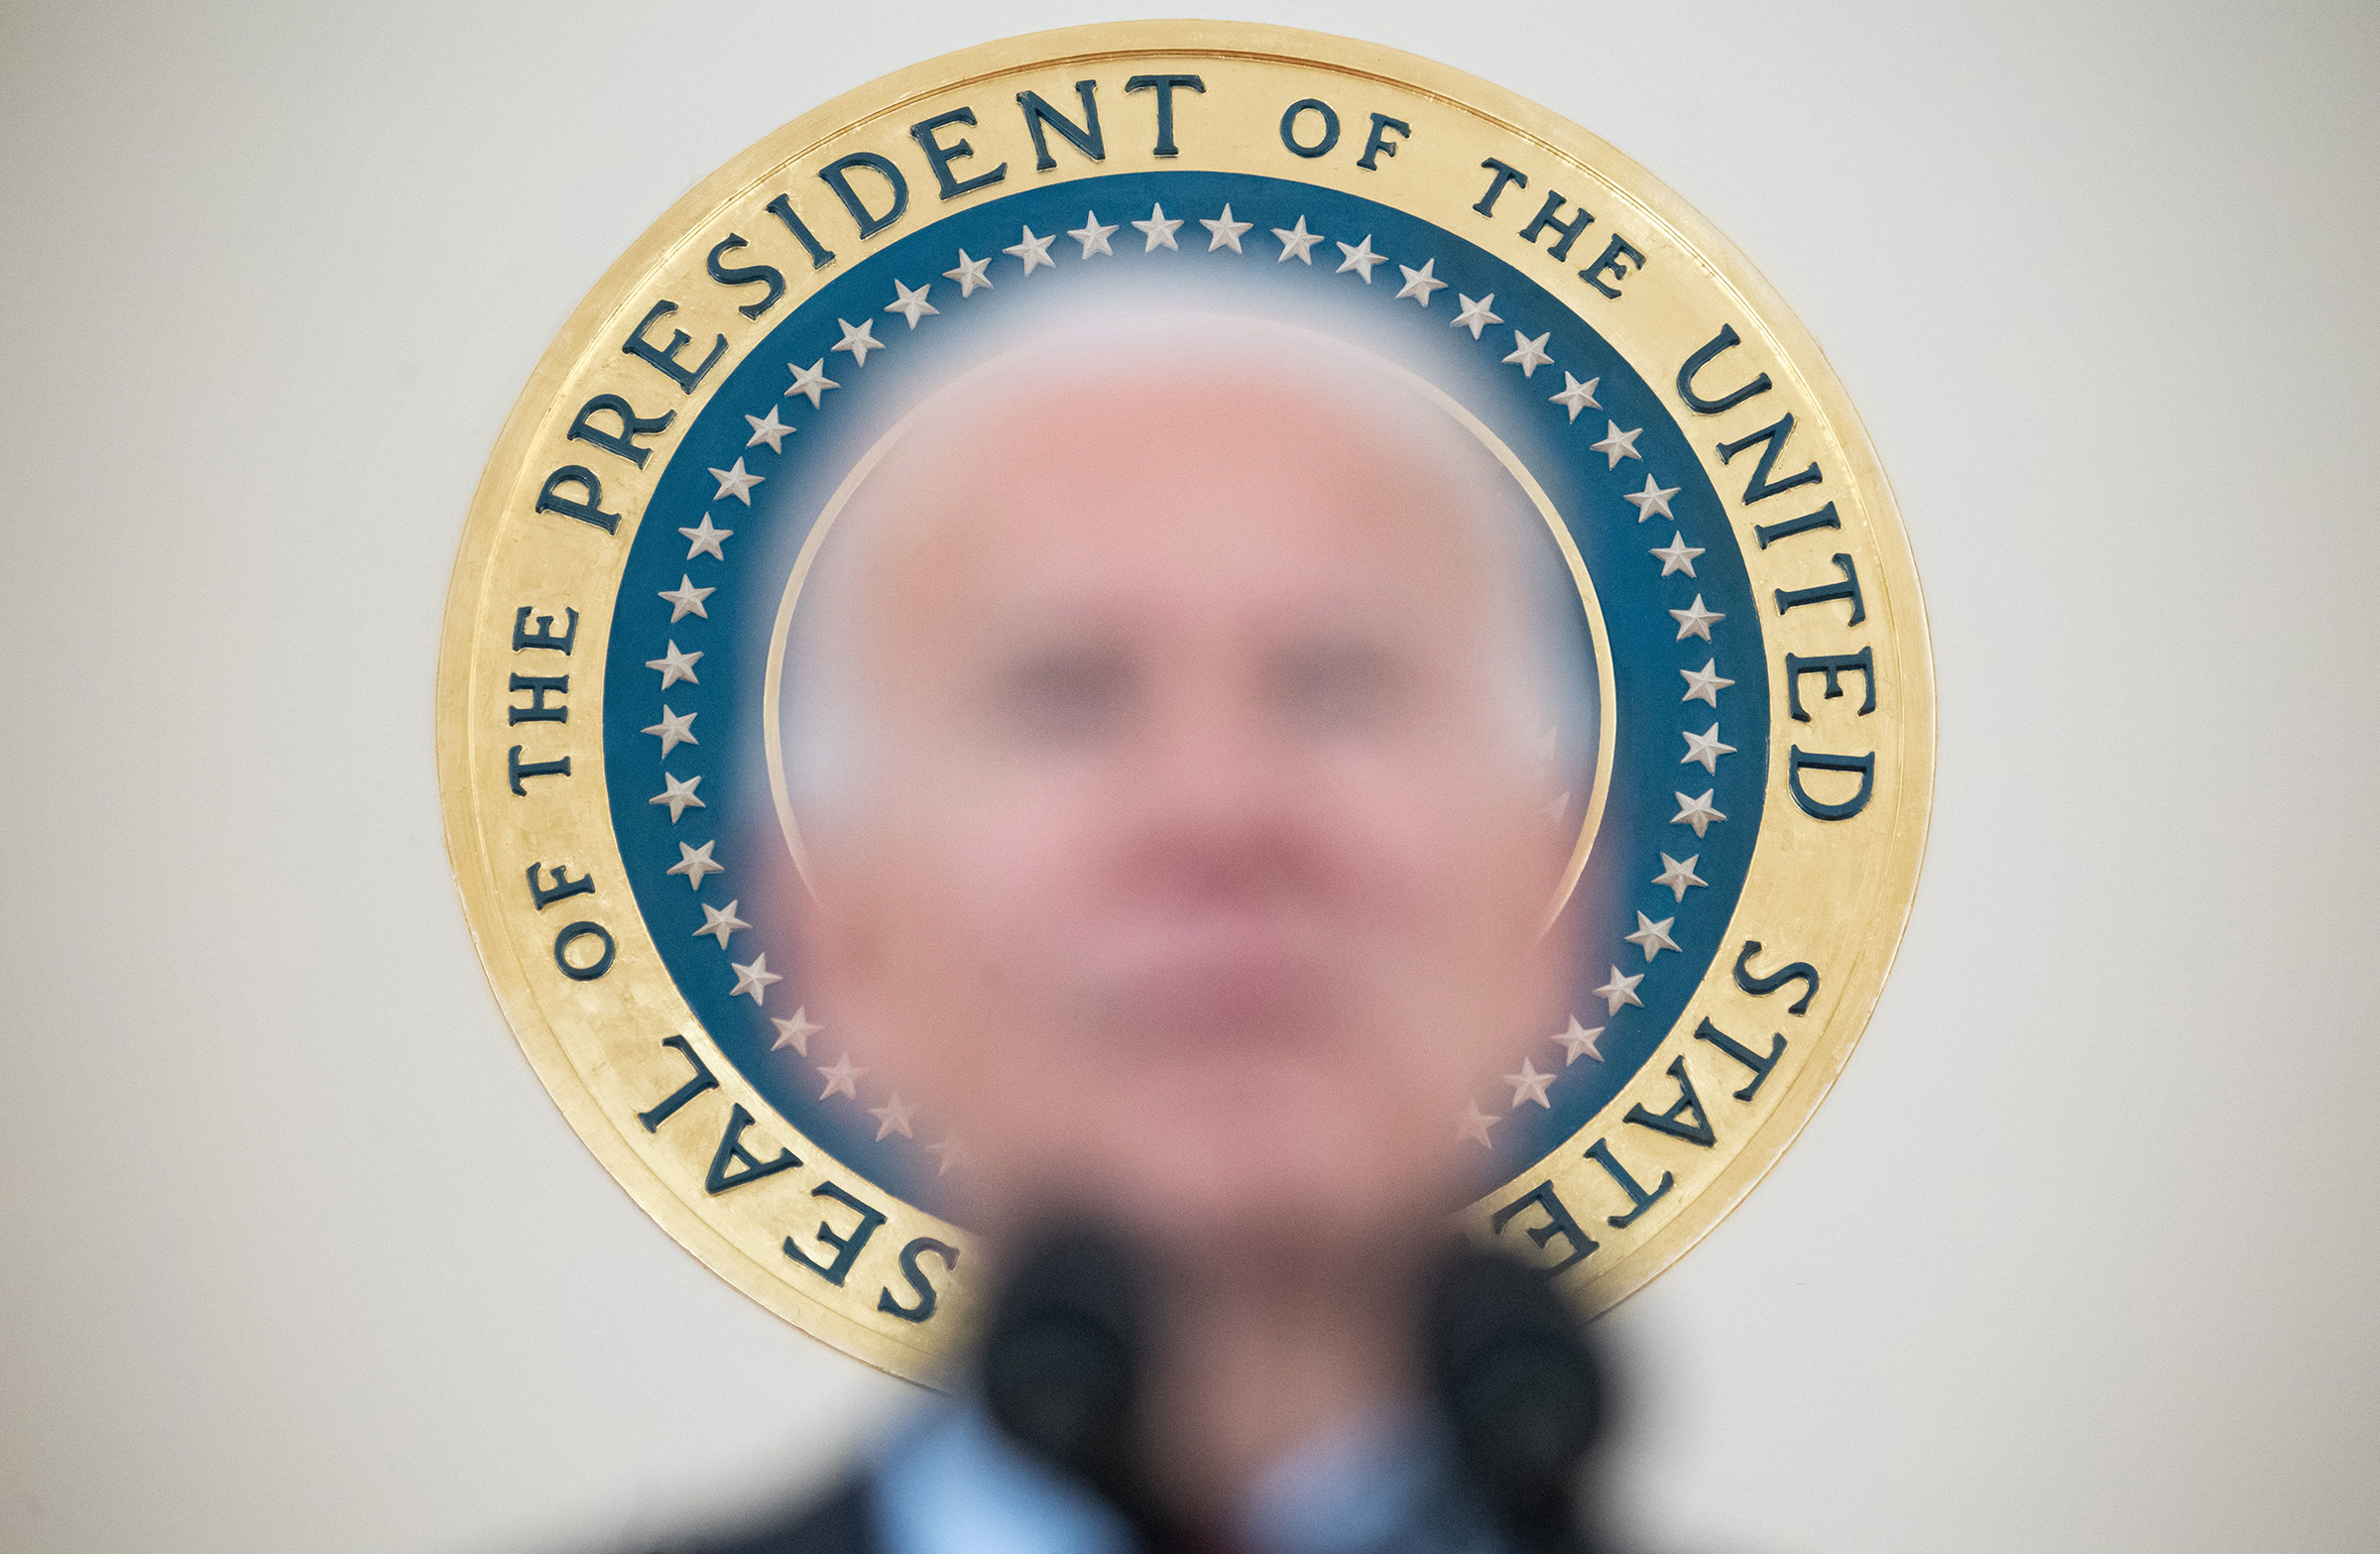 The seal of the President of the United States is seen as President Joe Biden speaks about lives lost to COVID-19 after the death toll passed 500,000, at the White House on Feb. 22, 2021.